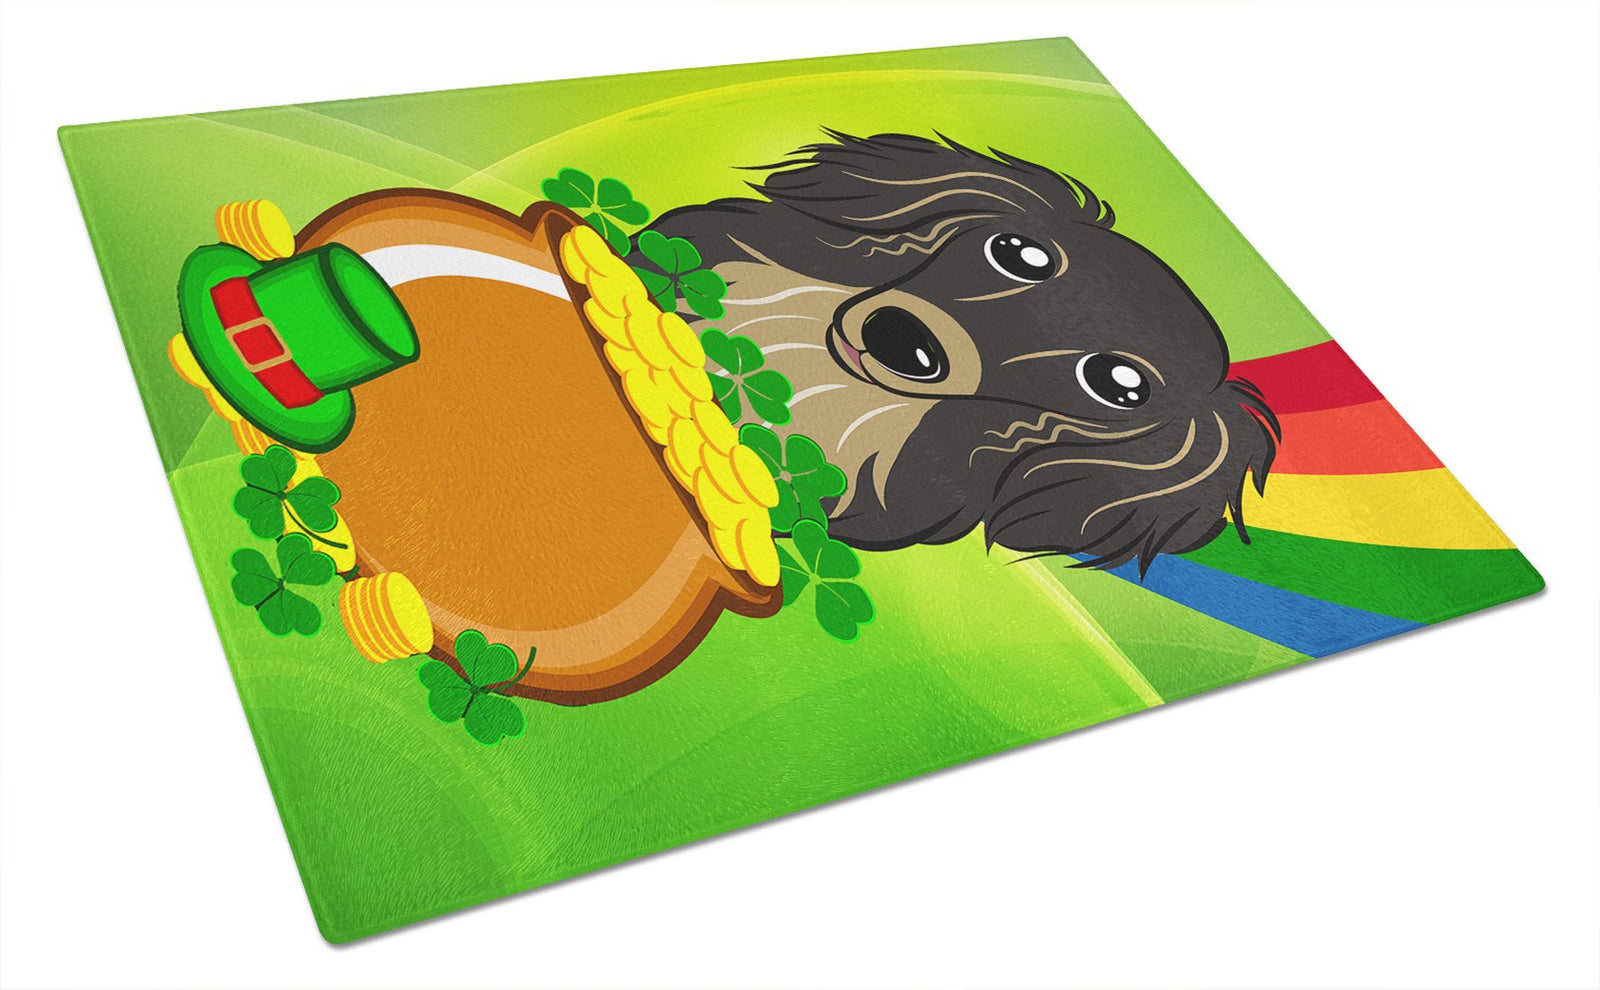 Longhair Black and Tan Dachshund St. Patrick's Day Glass Cutting Board Large BB1957LCB by Caroline's Treasures